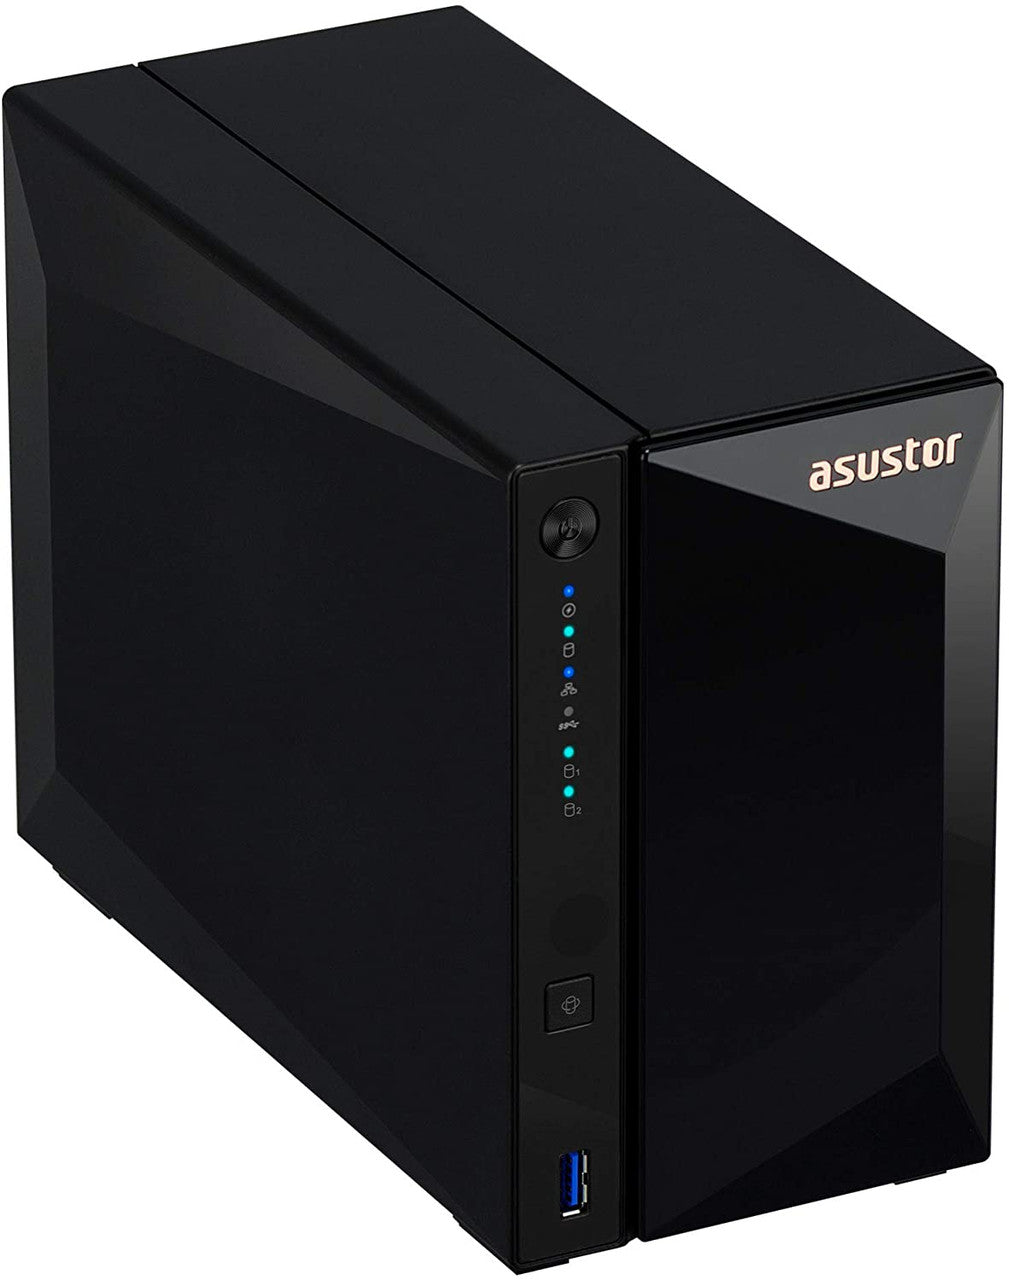 Asustor AS3302T 2-Bay Drivestor 2 PRO NAS with 2GB RAM and 20TB (2x10TB) Western Digital RED Plus Drives Fully Assembled and Tested